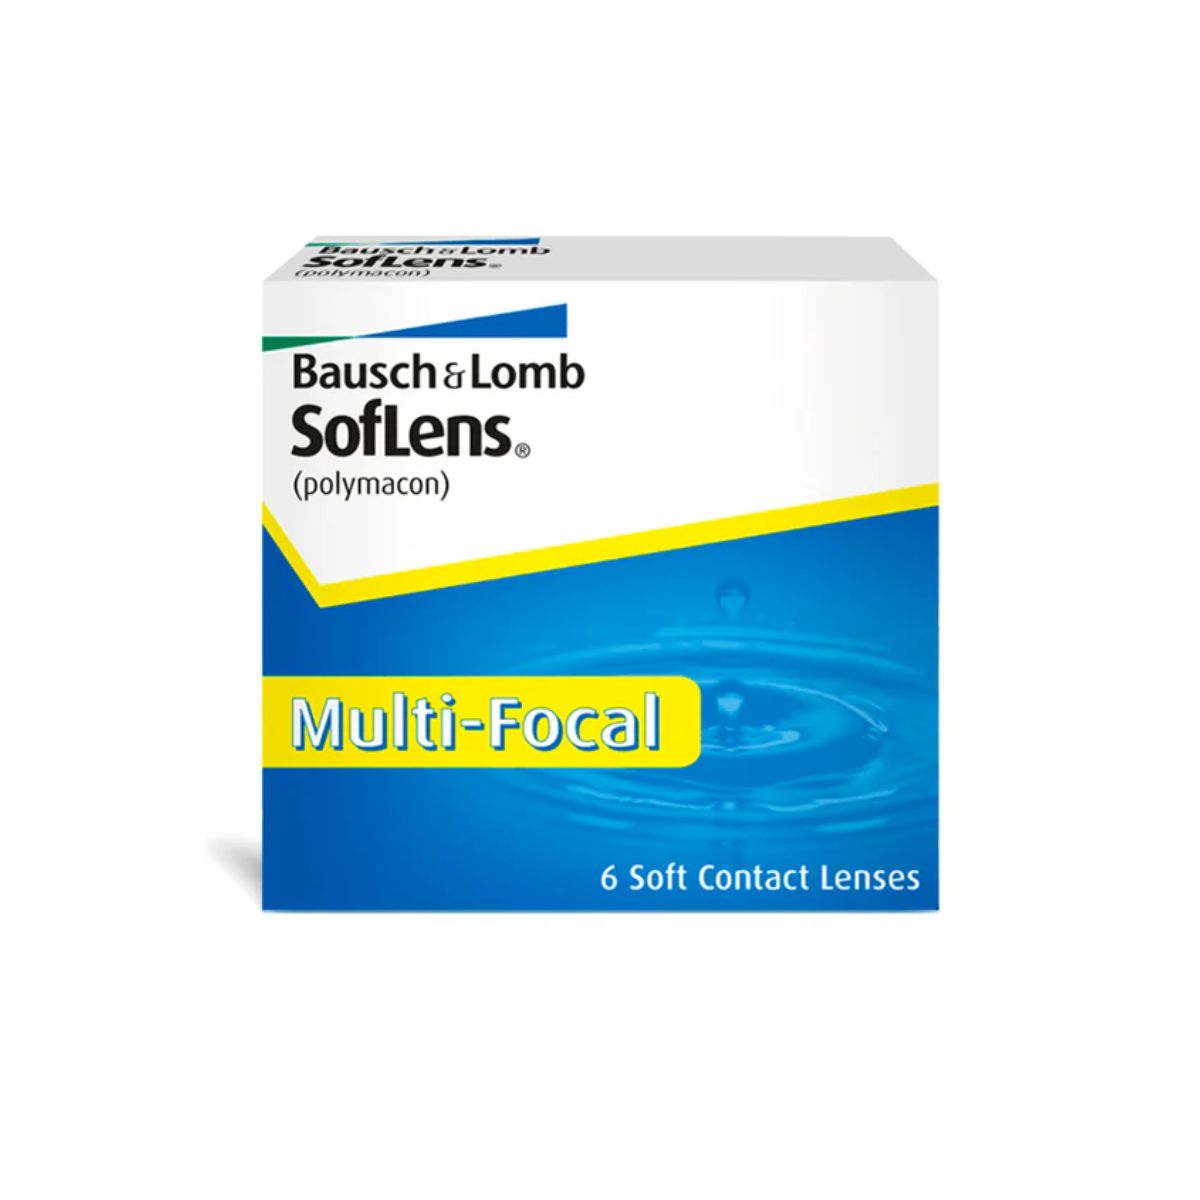 "https://optorium.in/products/soflens-multifocal-monthly-disposable-for-presbyopia optorium"